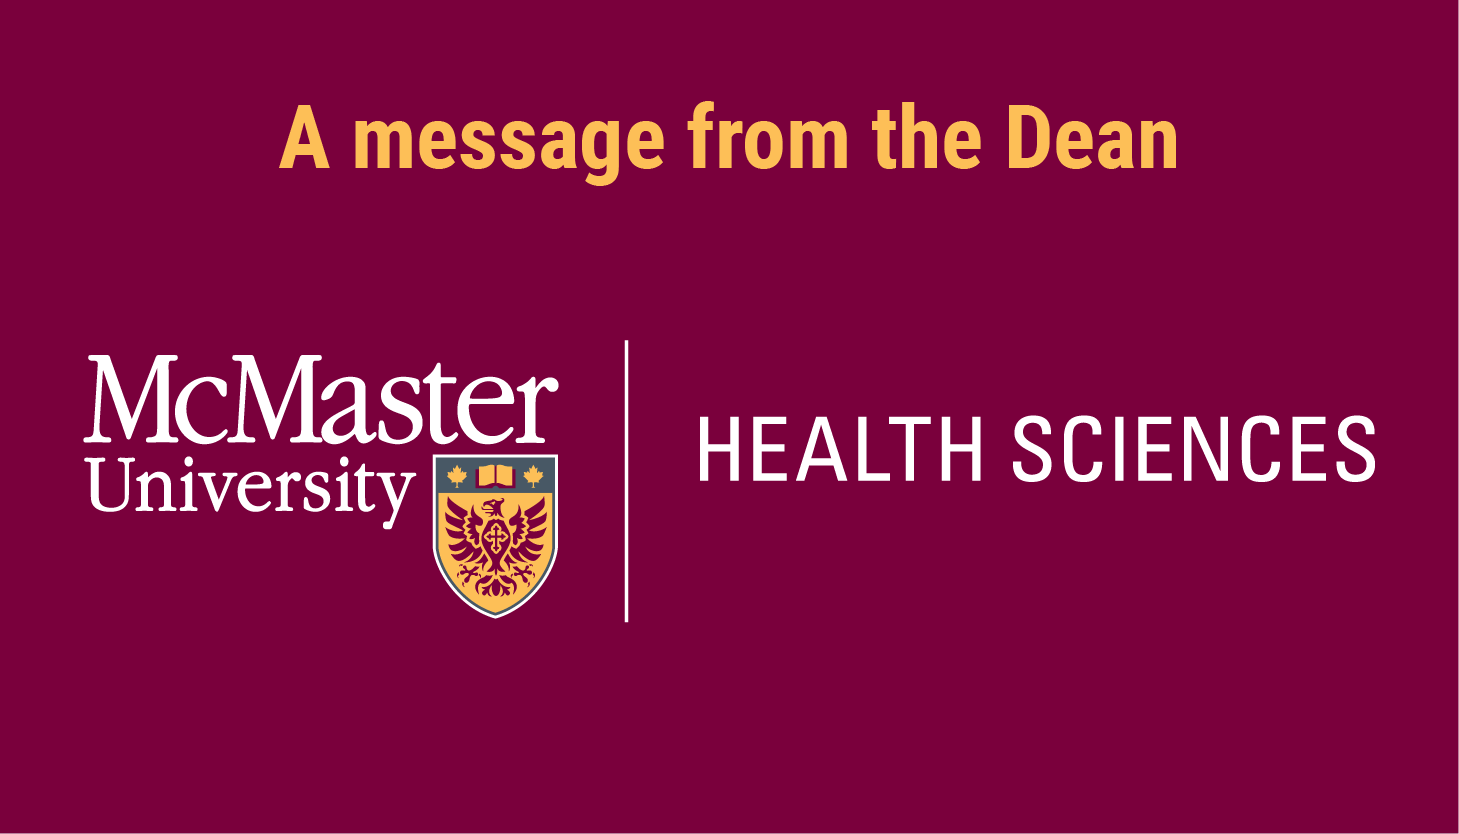 A message from the Dean of the Faculty of Health Sciences